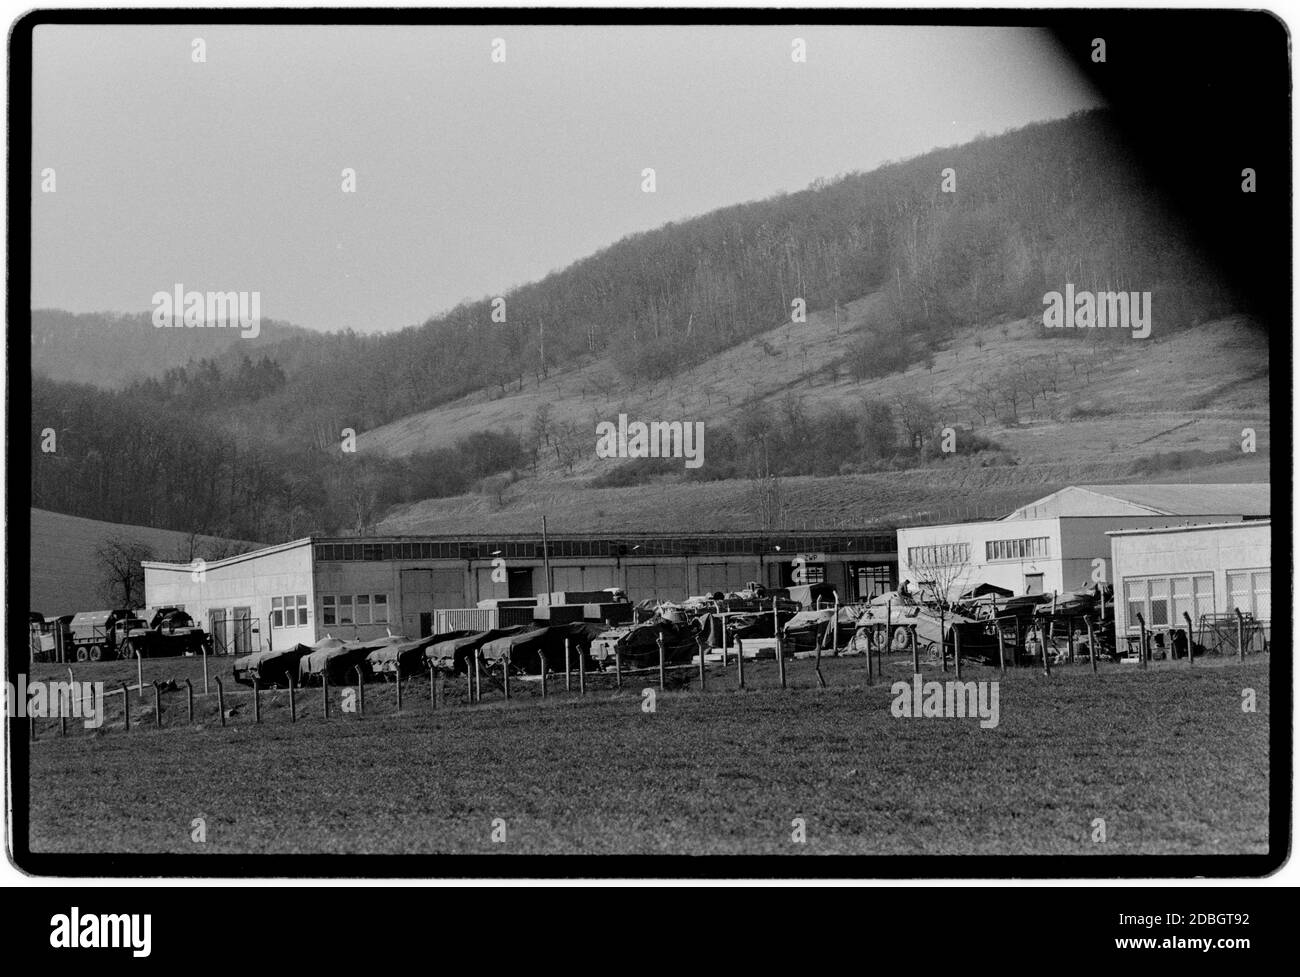 East Germany 1990 scanned in 2020 East German or Russian military vehicles in eastern Germany. East Germany, Deutsche Demokratische Republik the DDR after the fall of the Wall but before reunification March 1990 and scanned in 2020.East Germany, officially the German Democratic Republic, was a country that existed from 1949 to 1990, the period when the eastern portion of Germany was part of the Eastern Bloc during the Cold War. Stock Photo